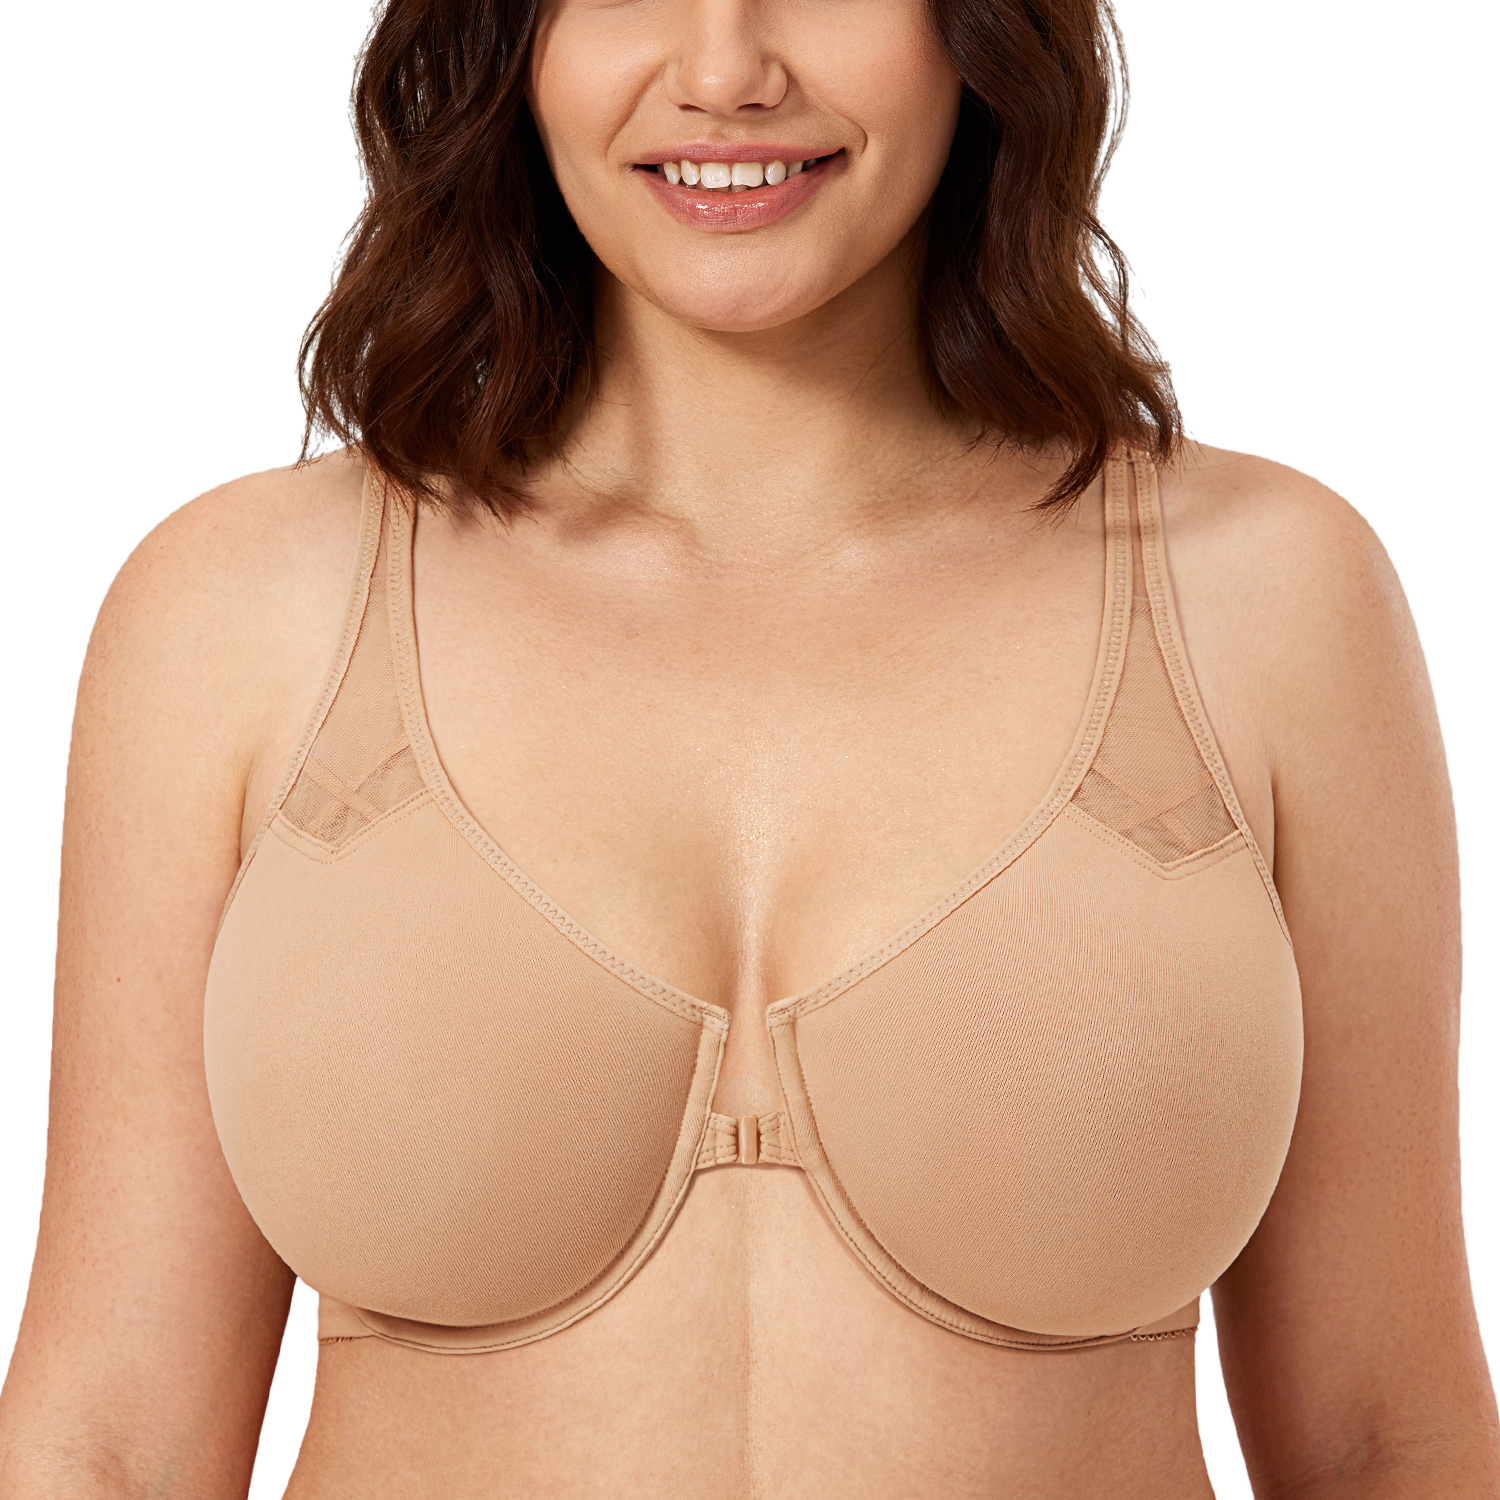 Buy DELIMIRA Women's Smooth Full Figure Large Busts Underwire